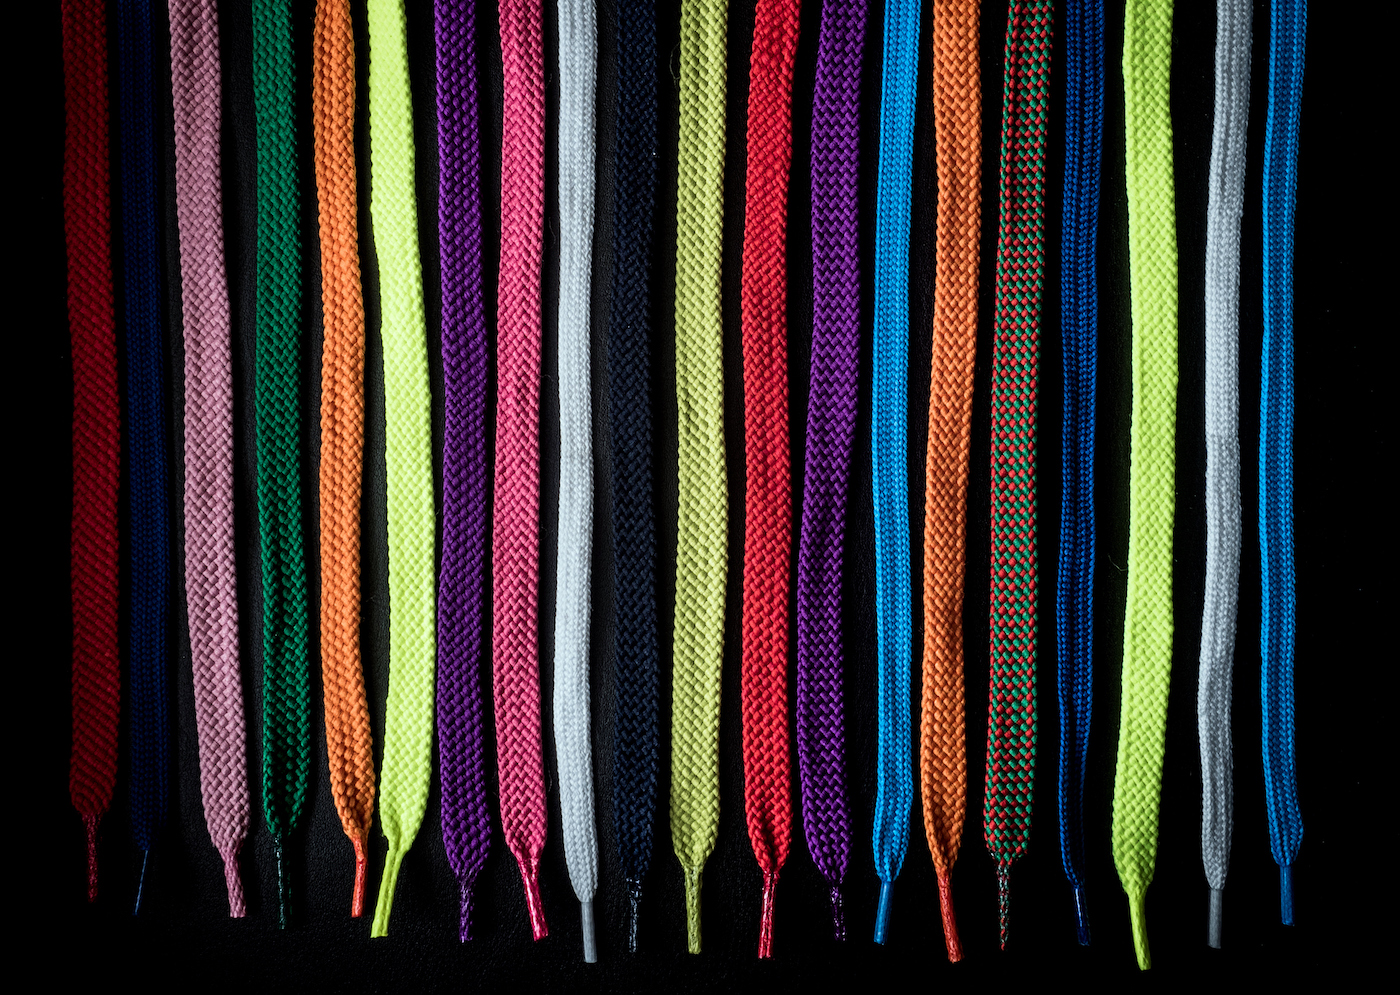 Pattern of multicolored shoelaces on a black background